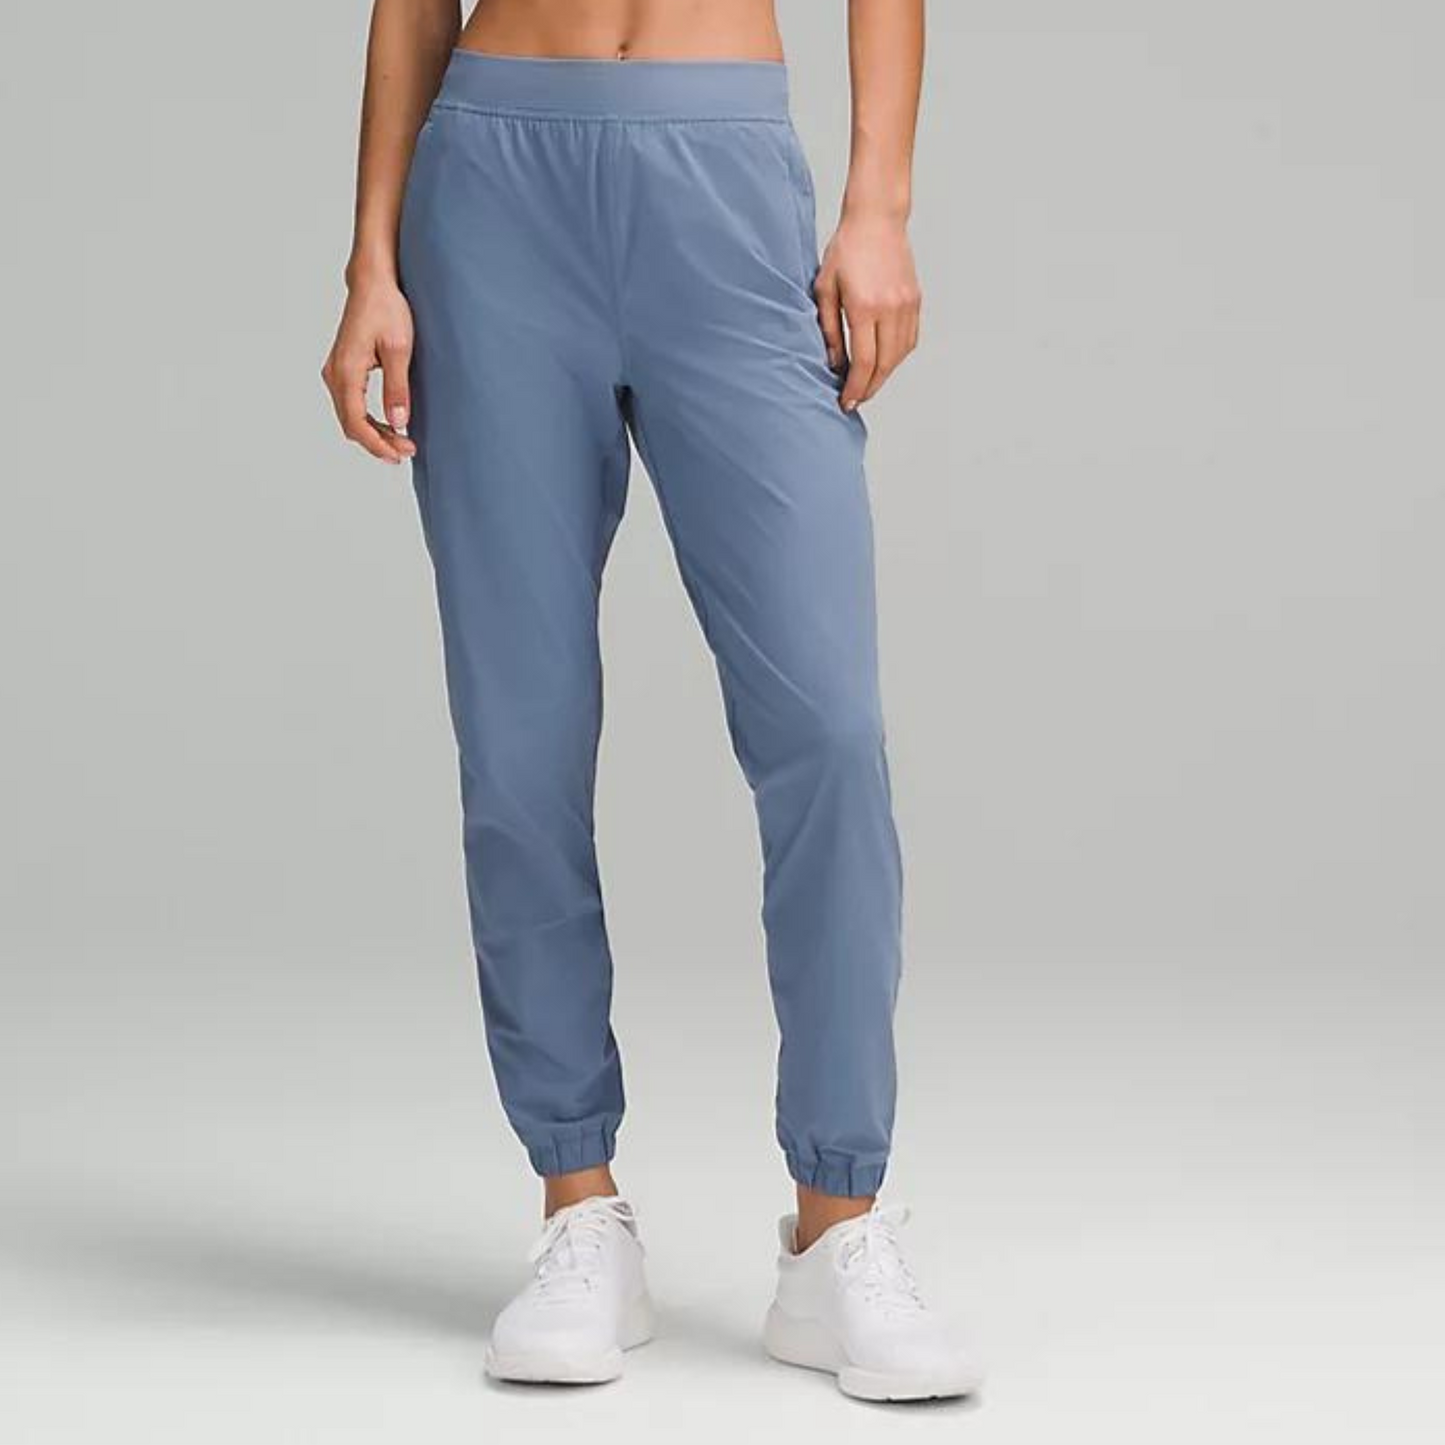 Adapted State High-Rise Jogger Full Length - Oasis Blue 28"